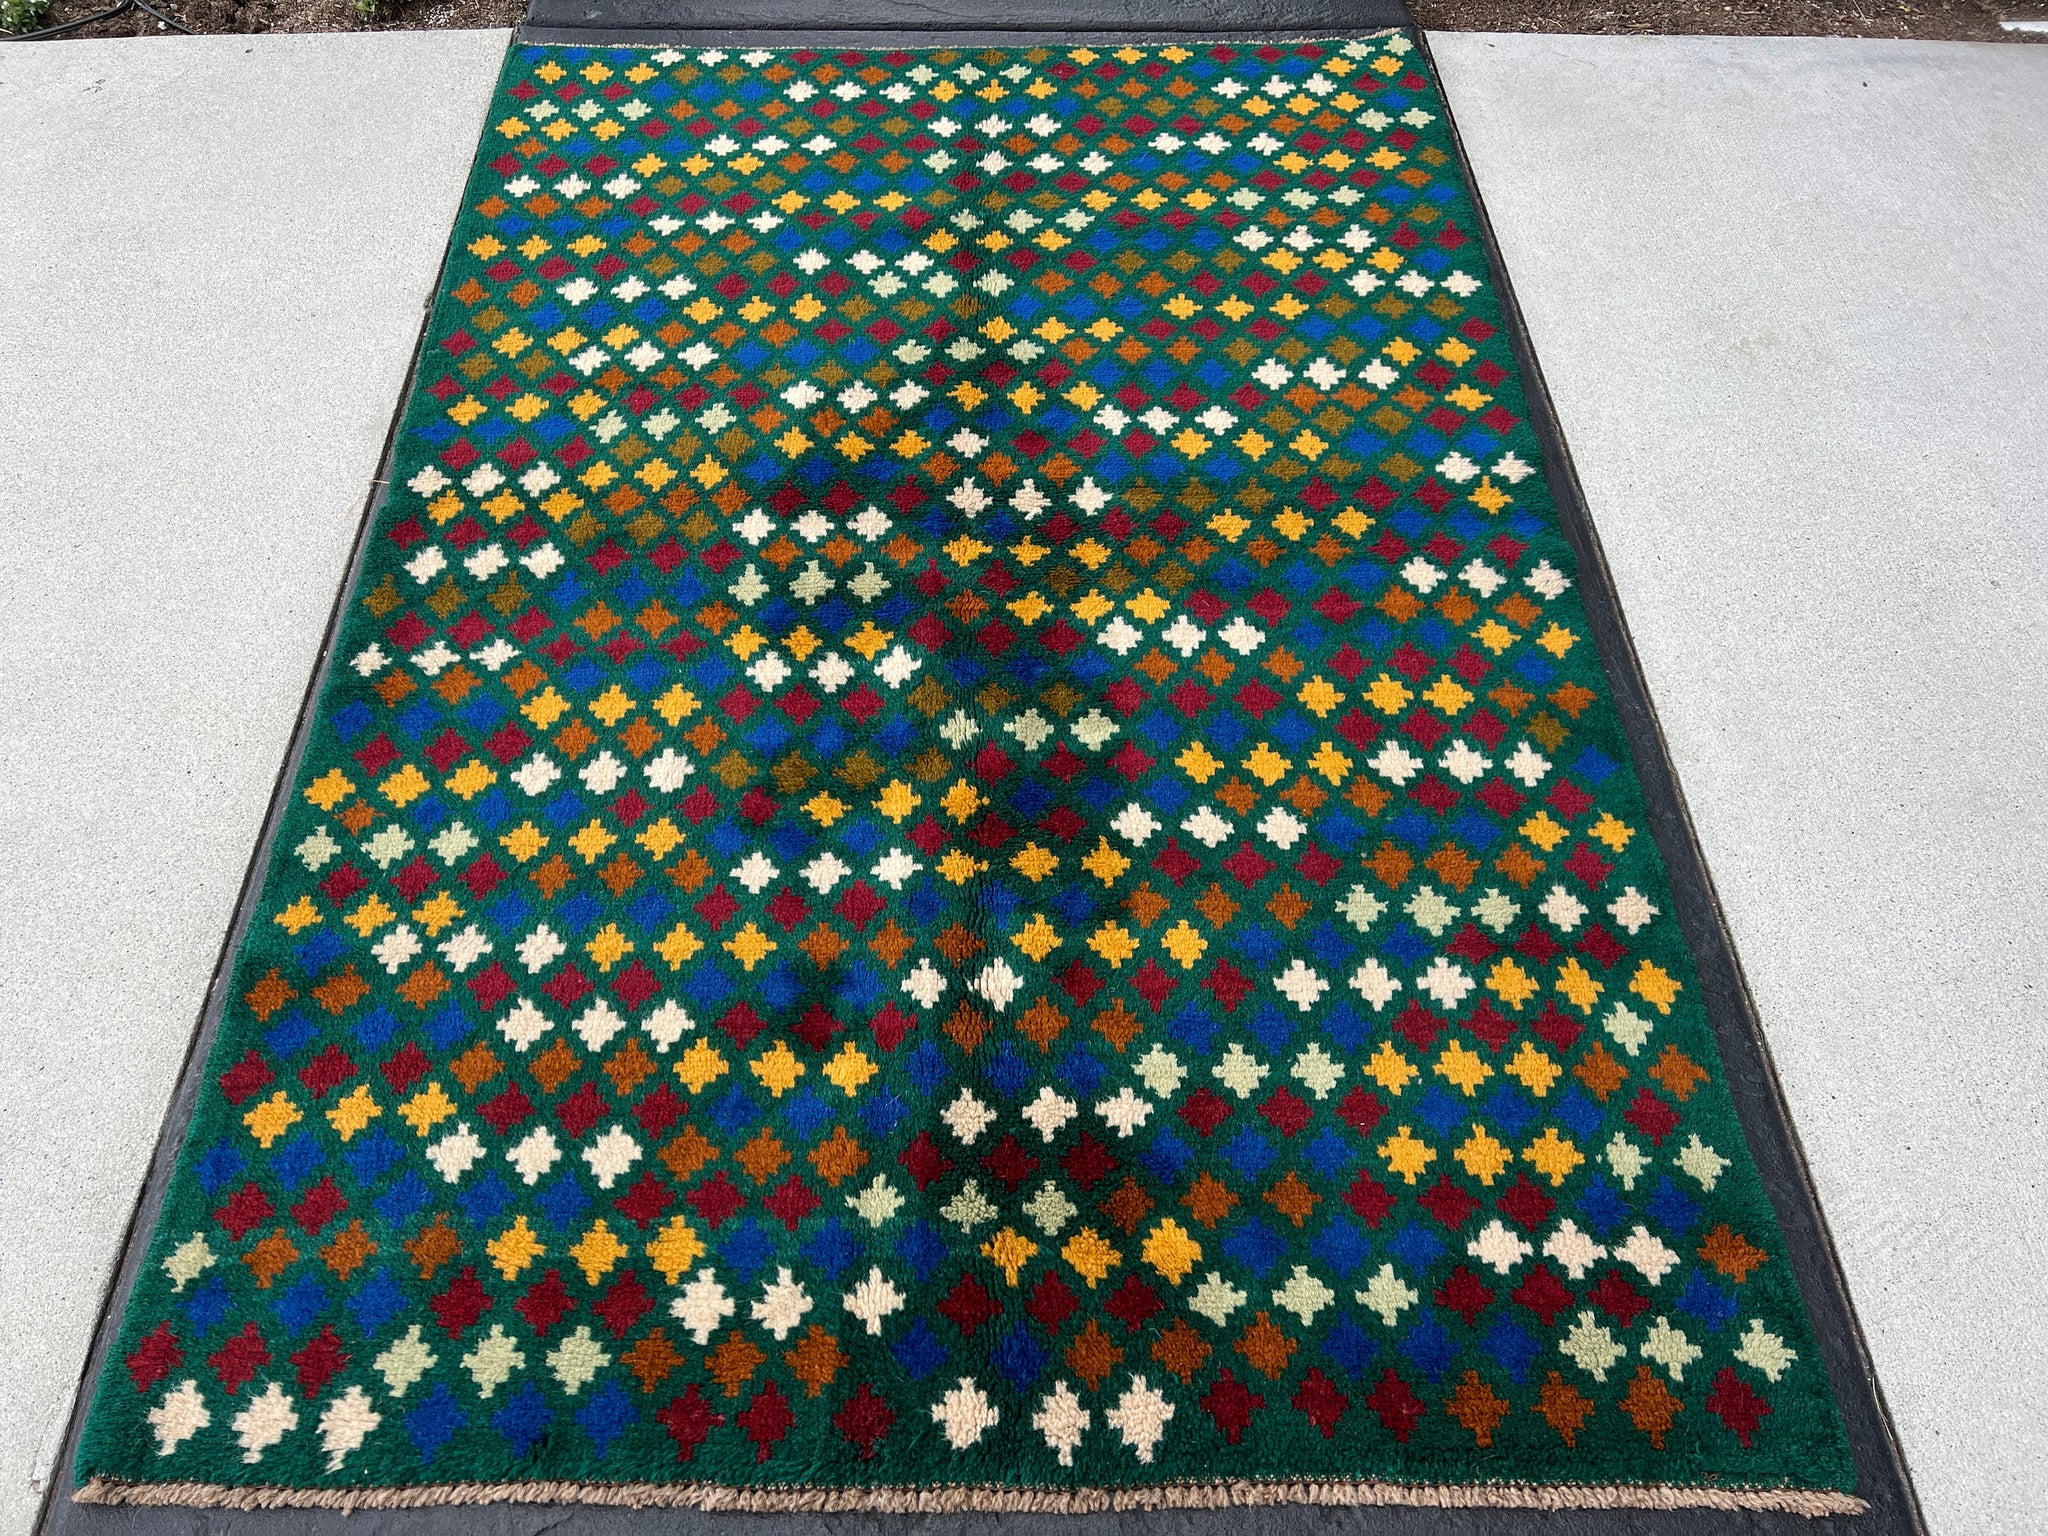 4x6 (120x215) Handmade Vintage Baluch Afghan Rug | Forest Green Taupe Blue Ivory Turquoise Gold Moss Green Brown Geometric Hand Knotted Wool